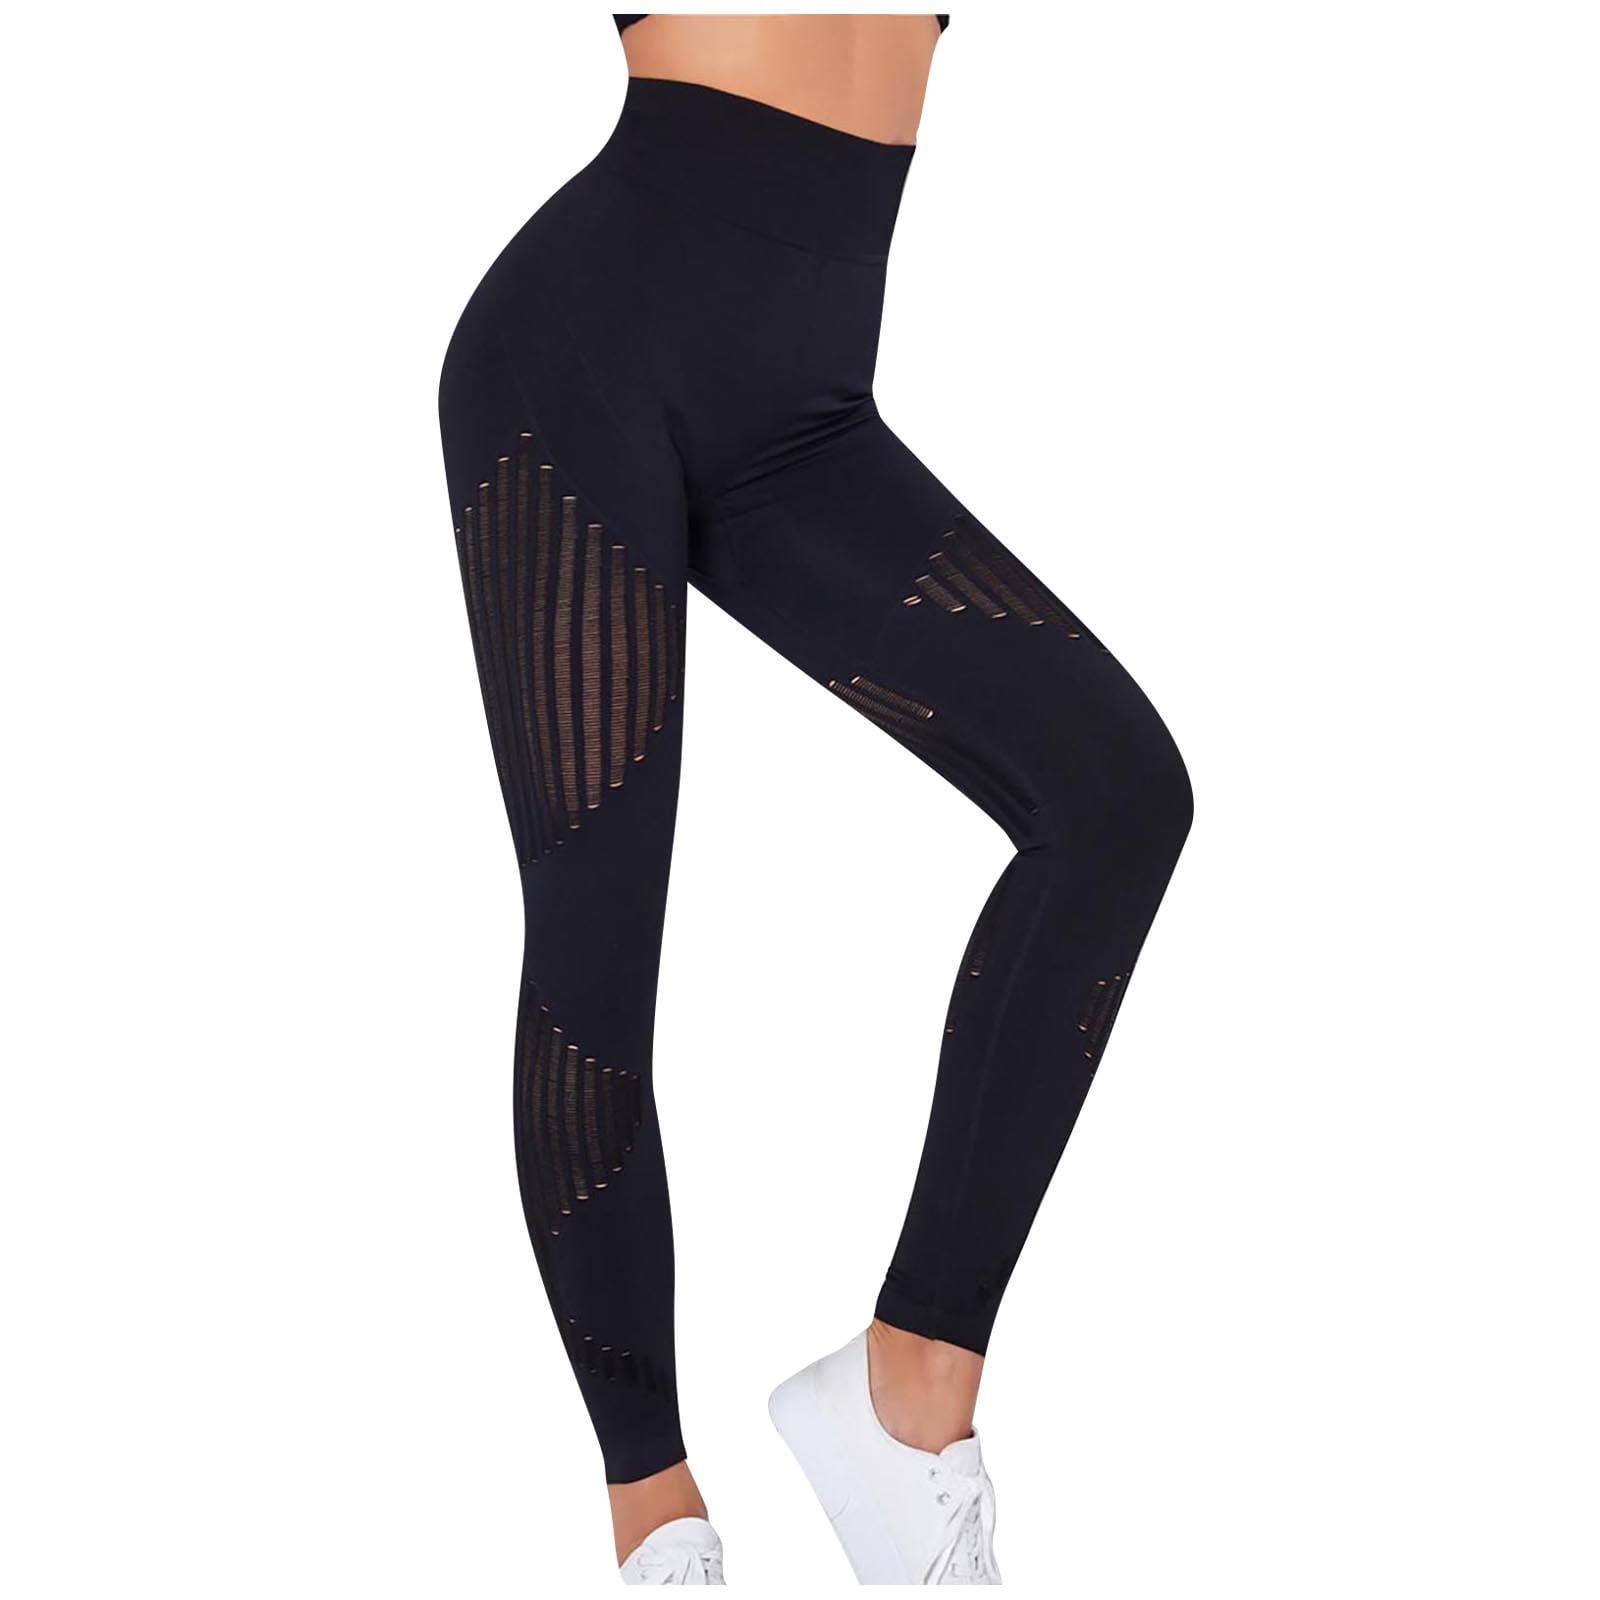  KLL Seamless Vintage Ethnic Grunge Tribal Yoga Pants for Women  Stretch Leggings Sport High Waist Yoga Pants with Pockets Tummy : Clothing,  Shoes & Jewelry